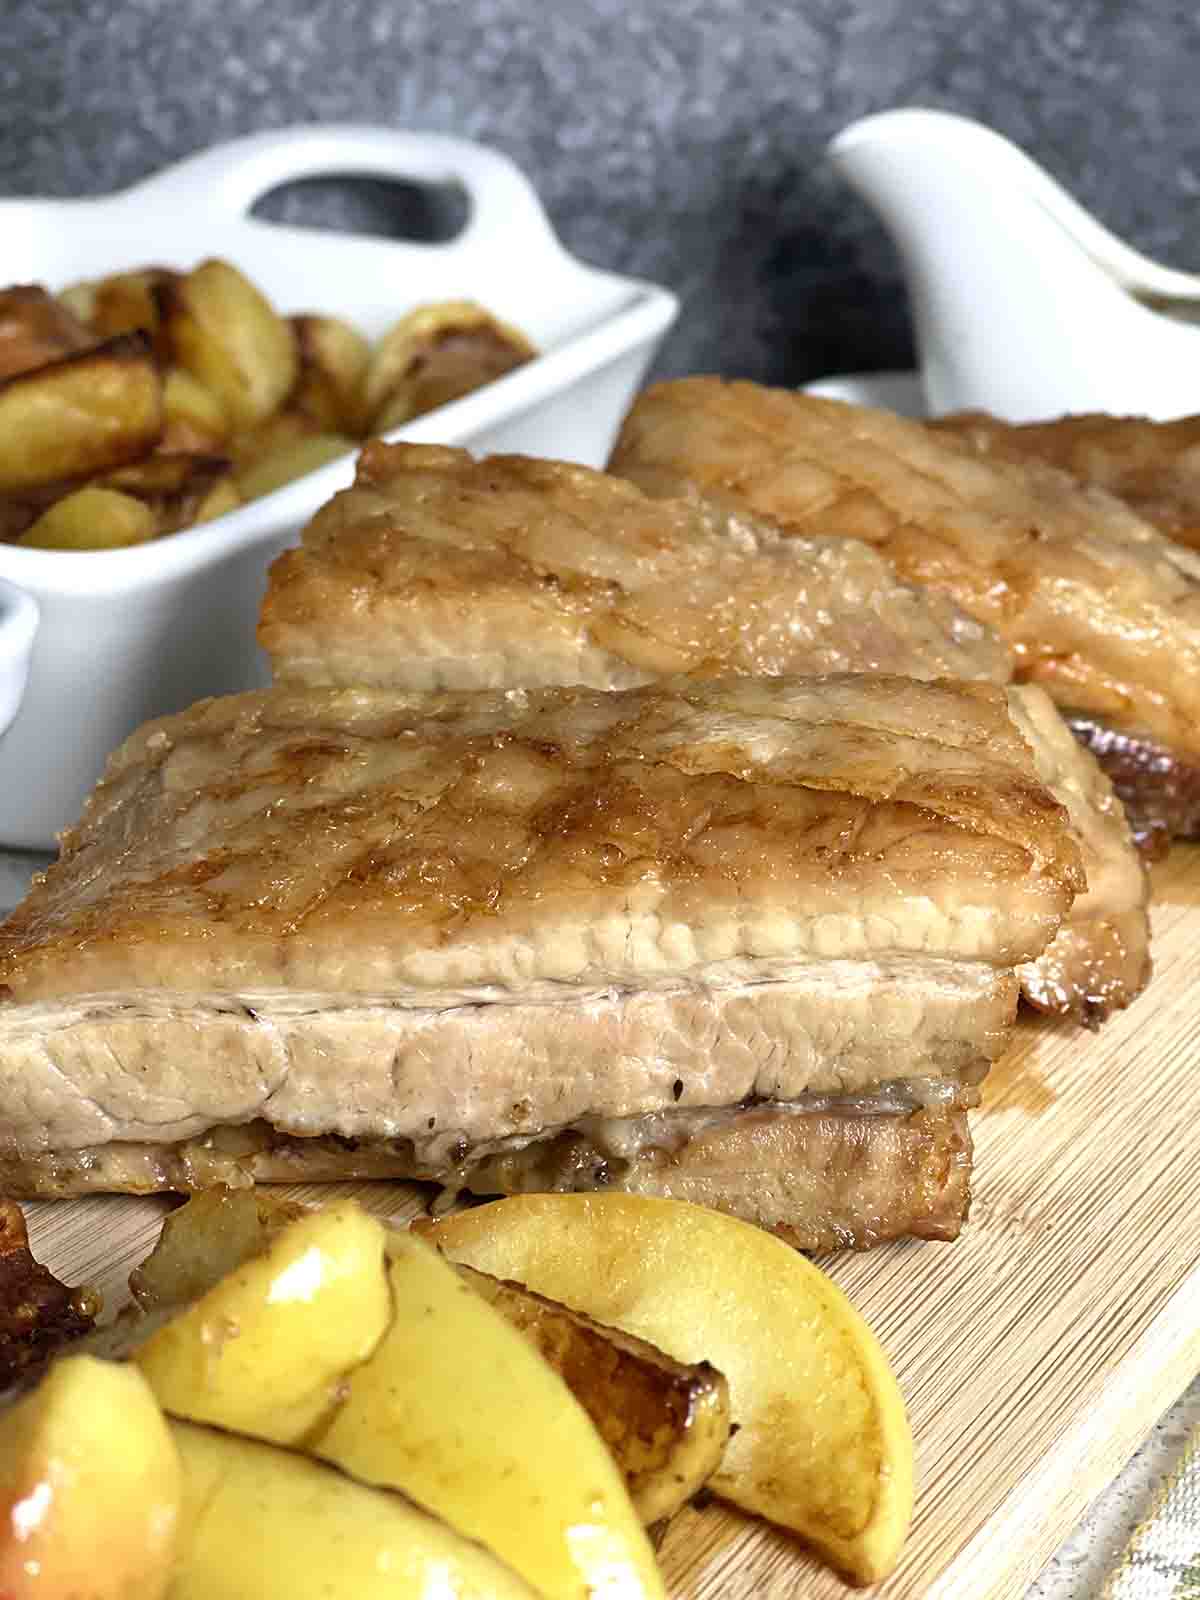 pork with apples on a board.